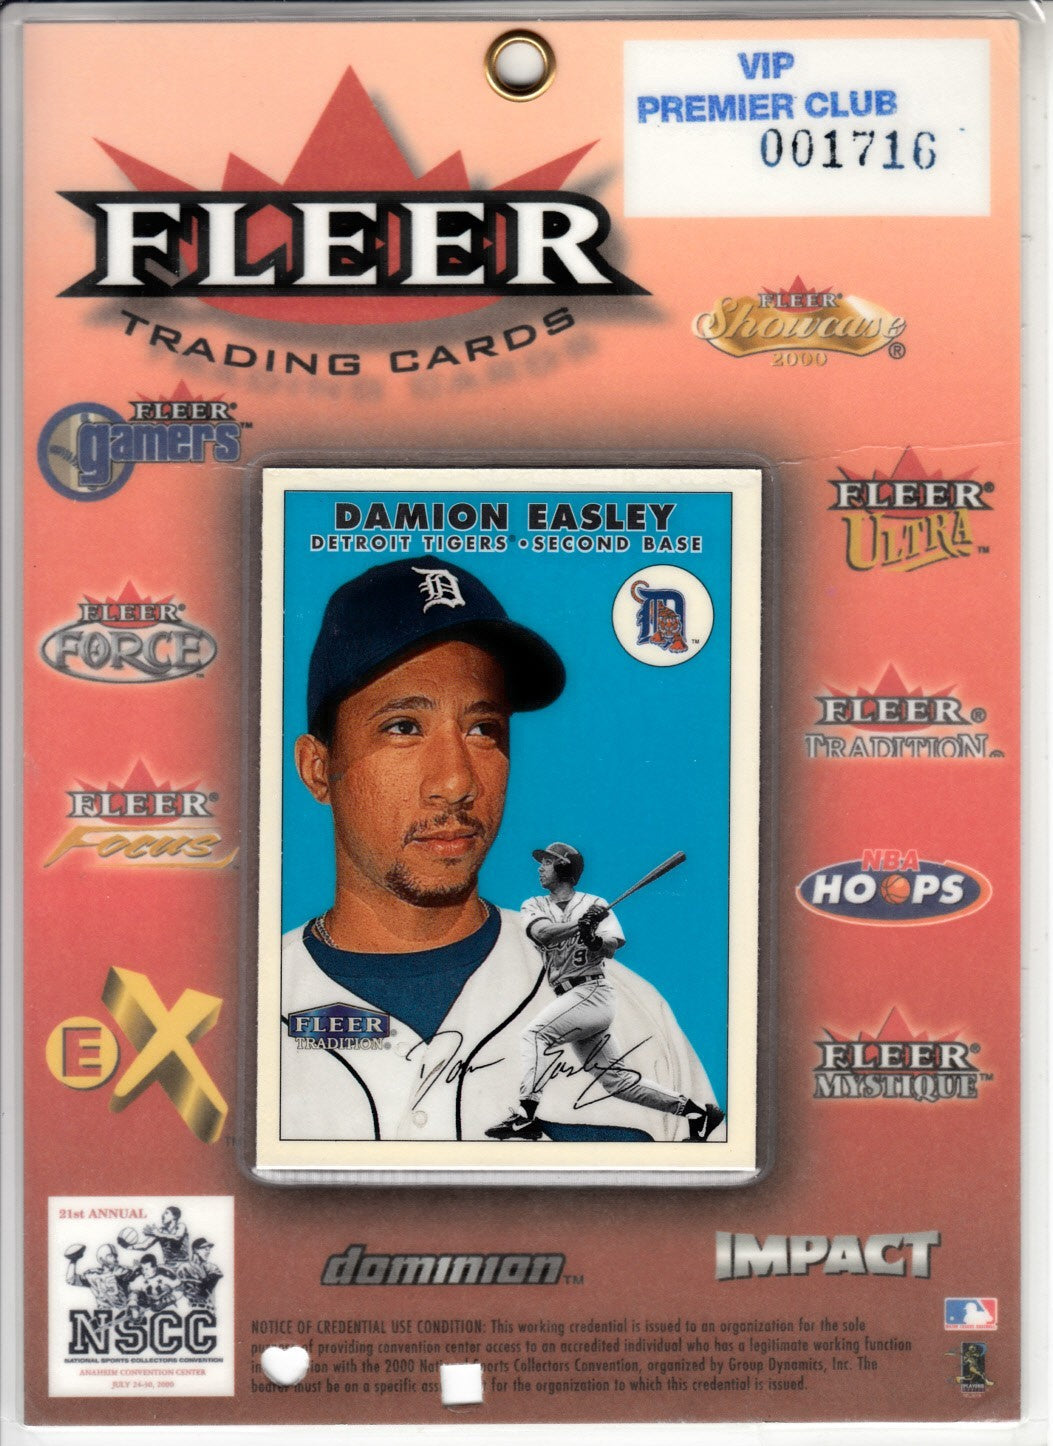 Damion Easley 2000 Fleer National Sports Collectors Convention Press badge or credential laminated